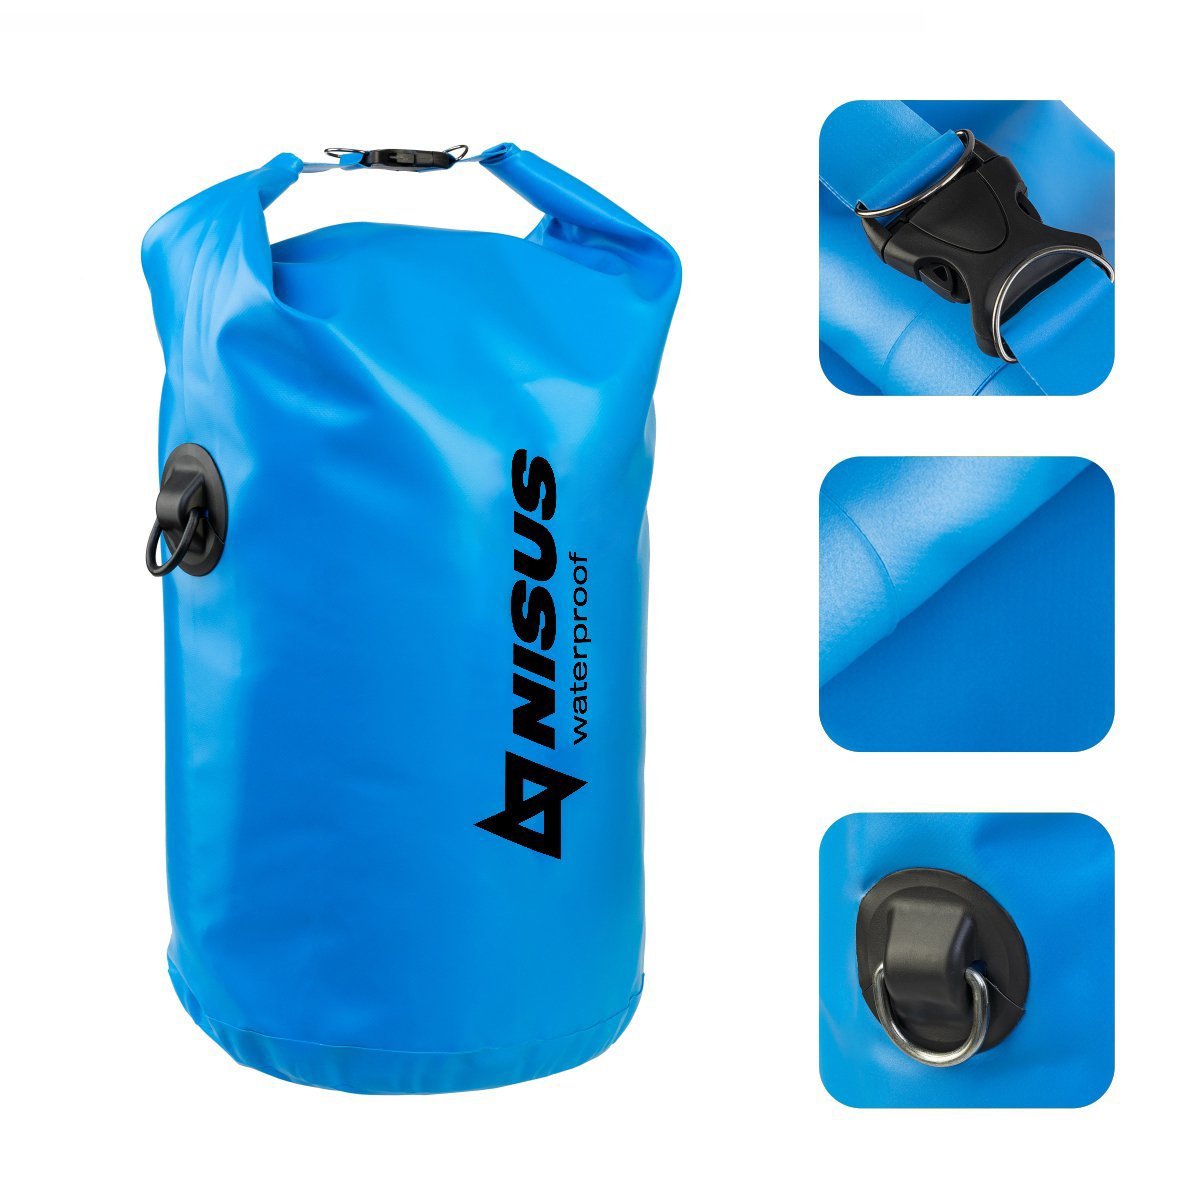 160 L Waterproof Extra Large Dry Bag, Blue